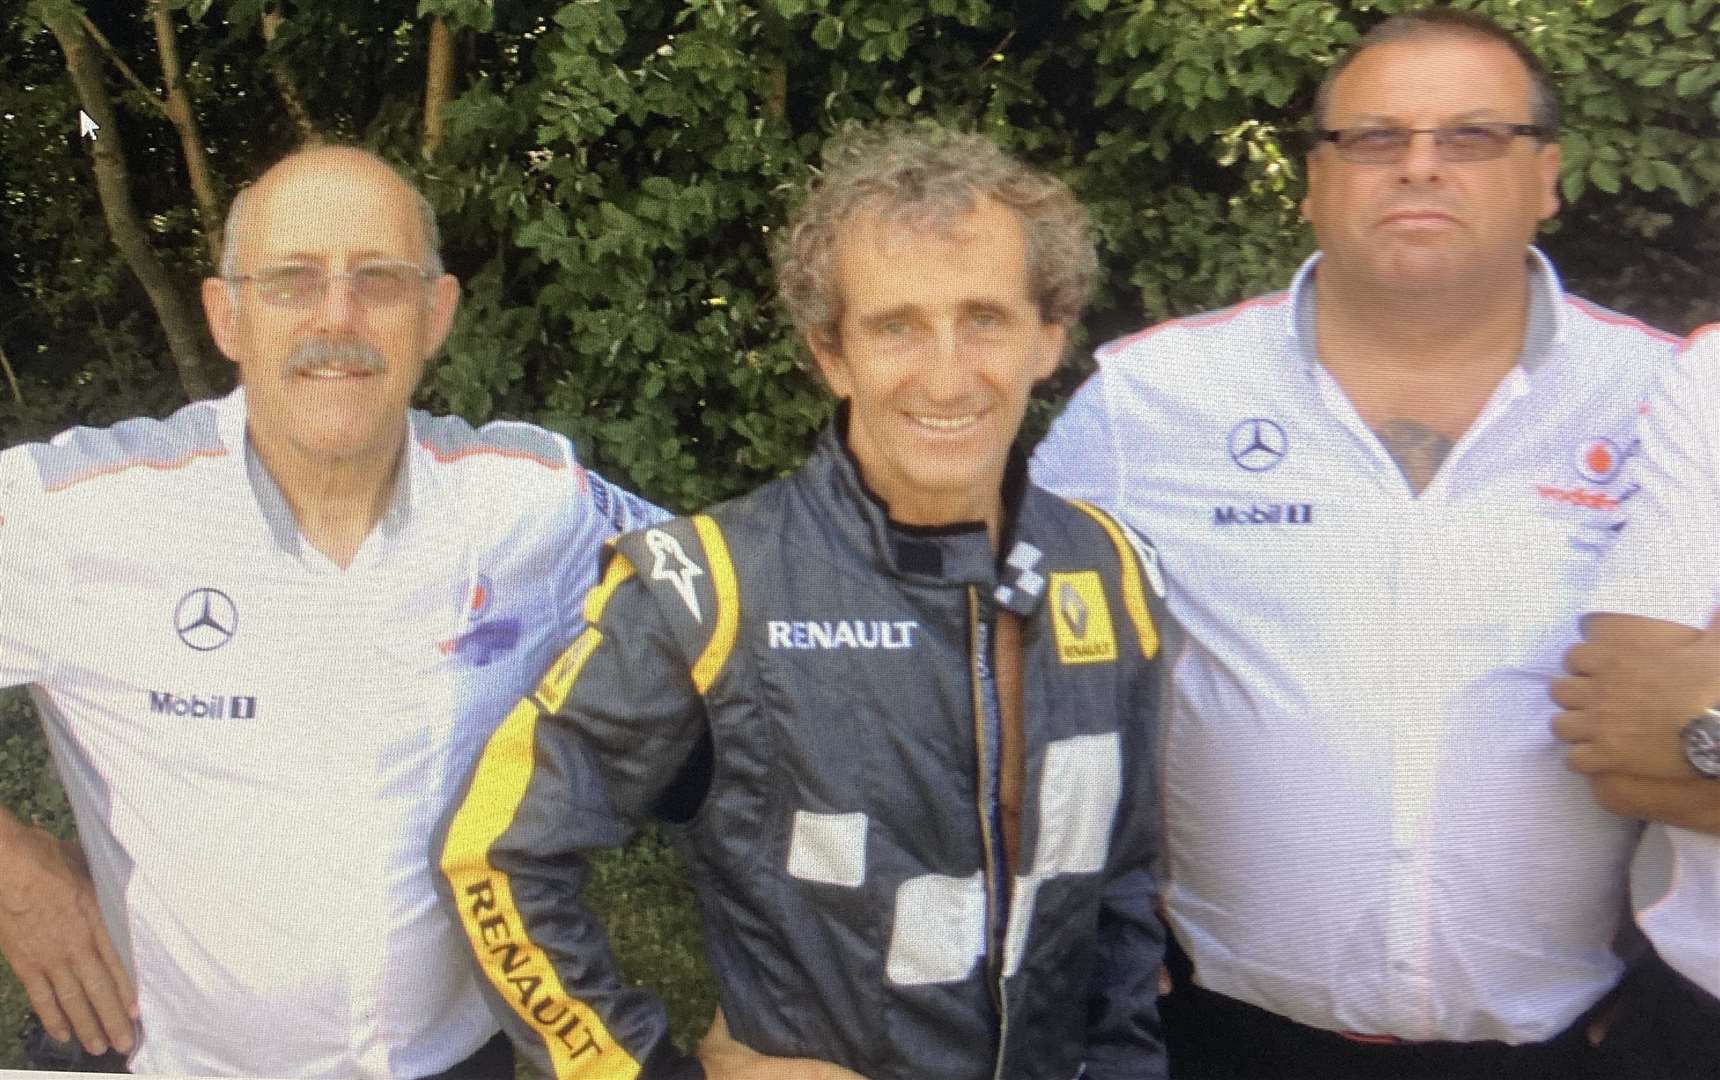 With the French champion Alain Prost